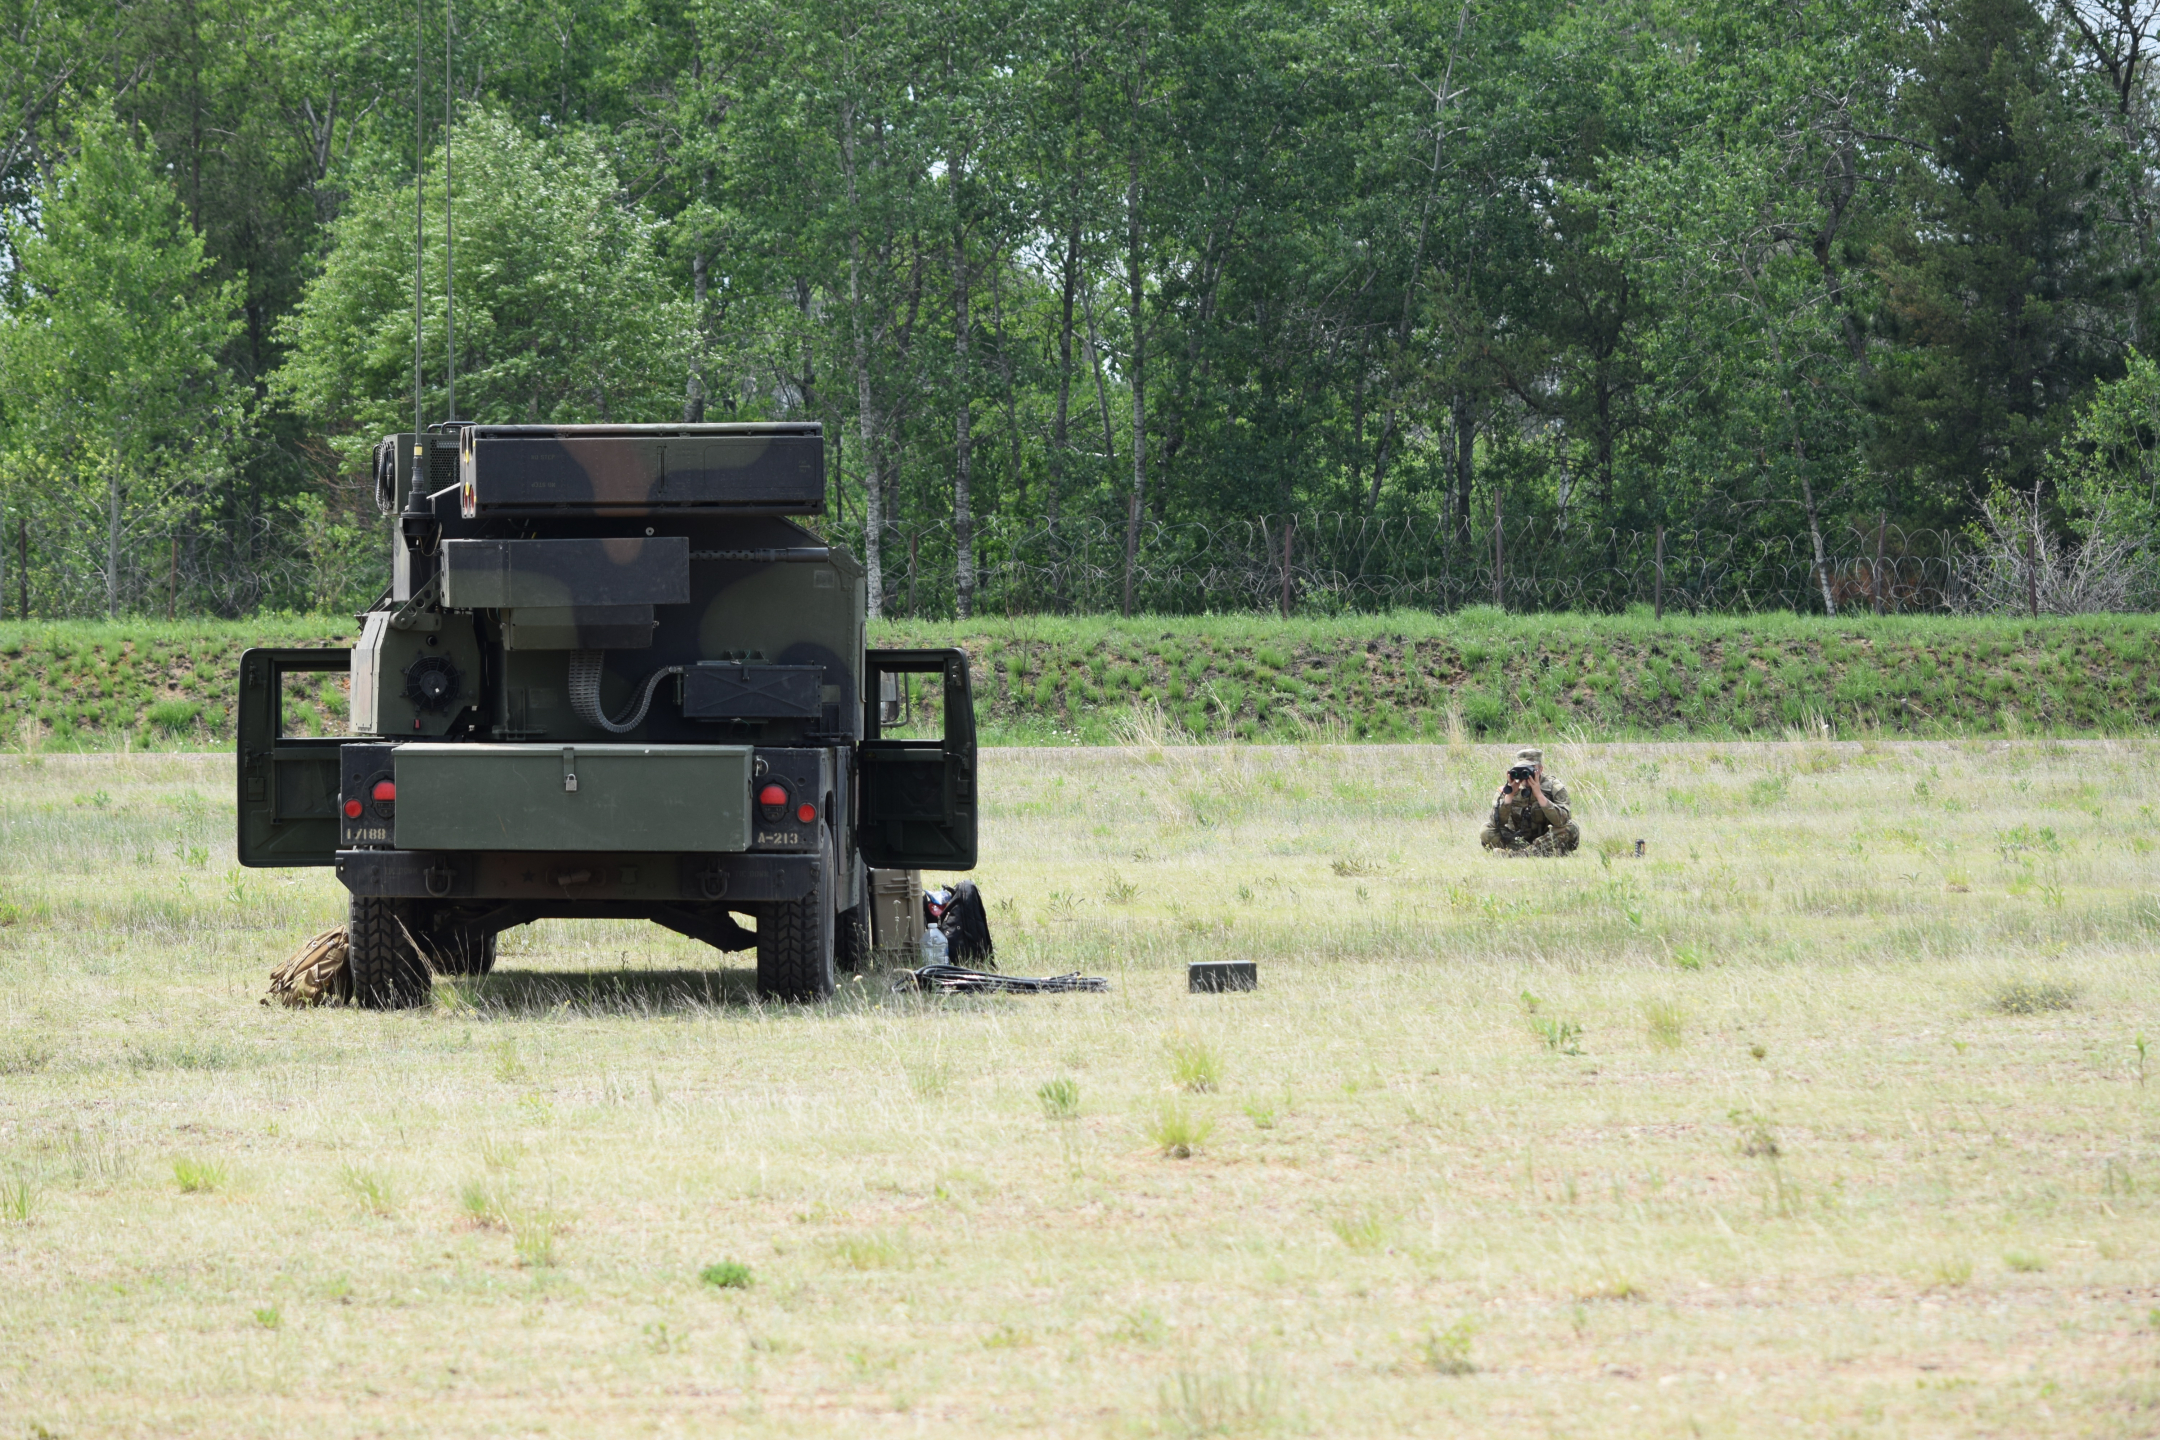 Soldiers of the 1-188th ADA preparing their Avengers for an exercise during annual training.